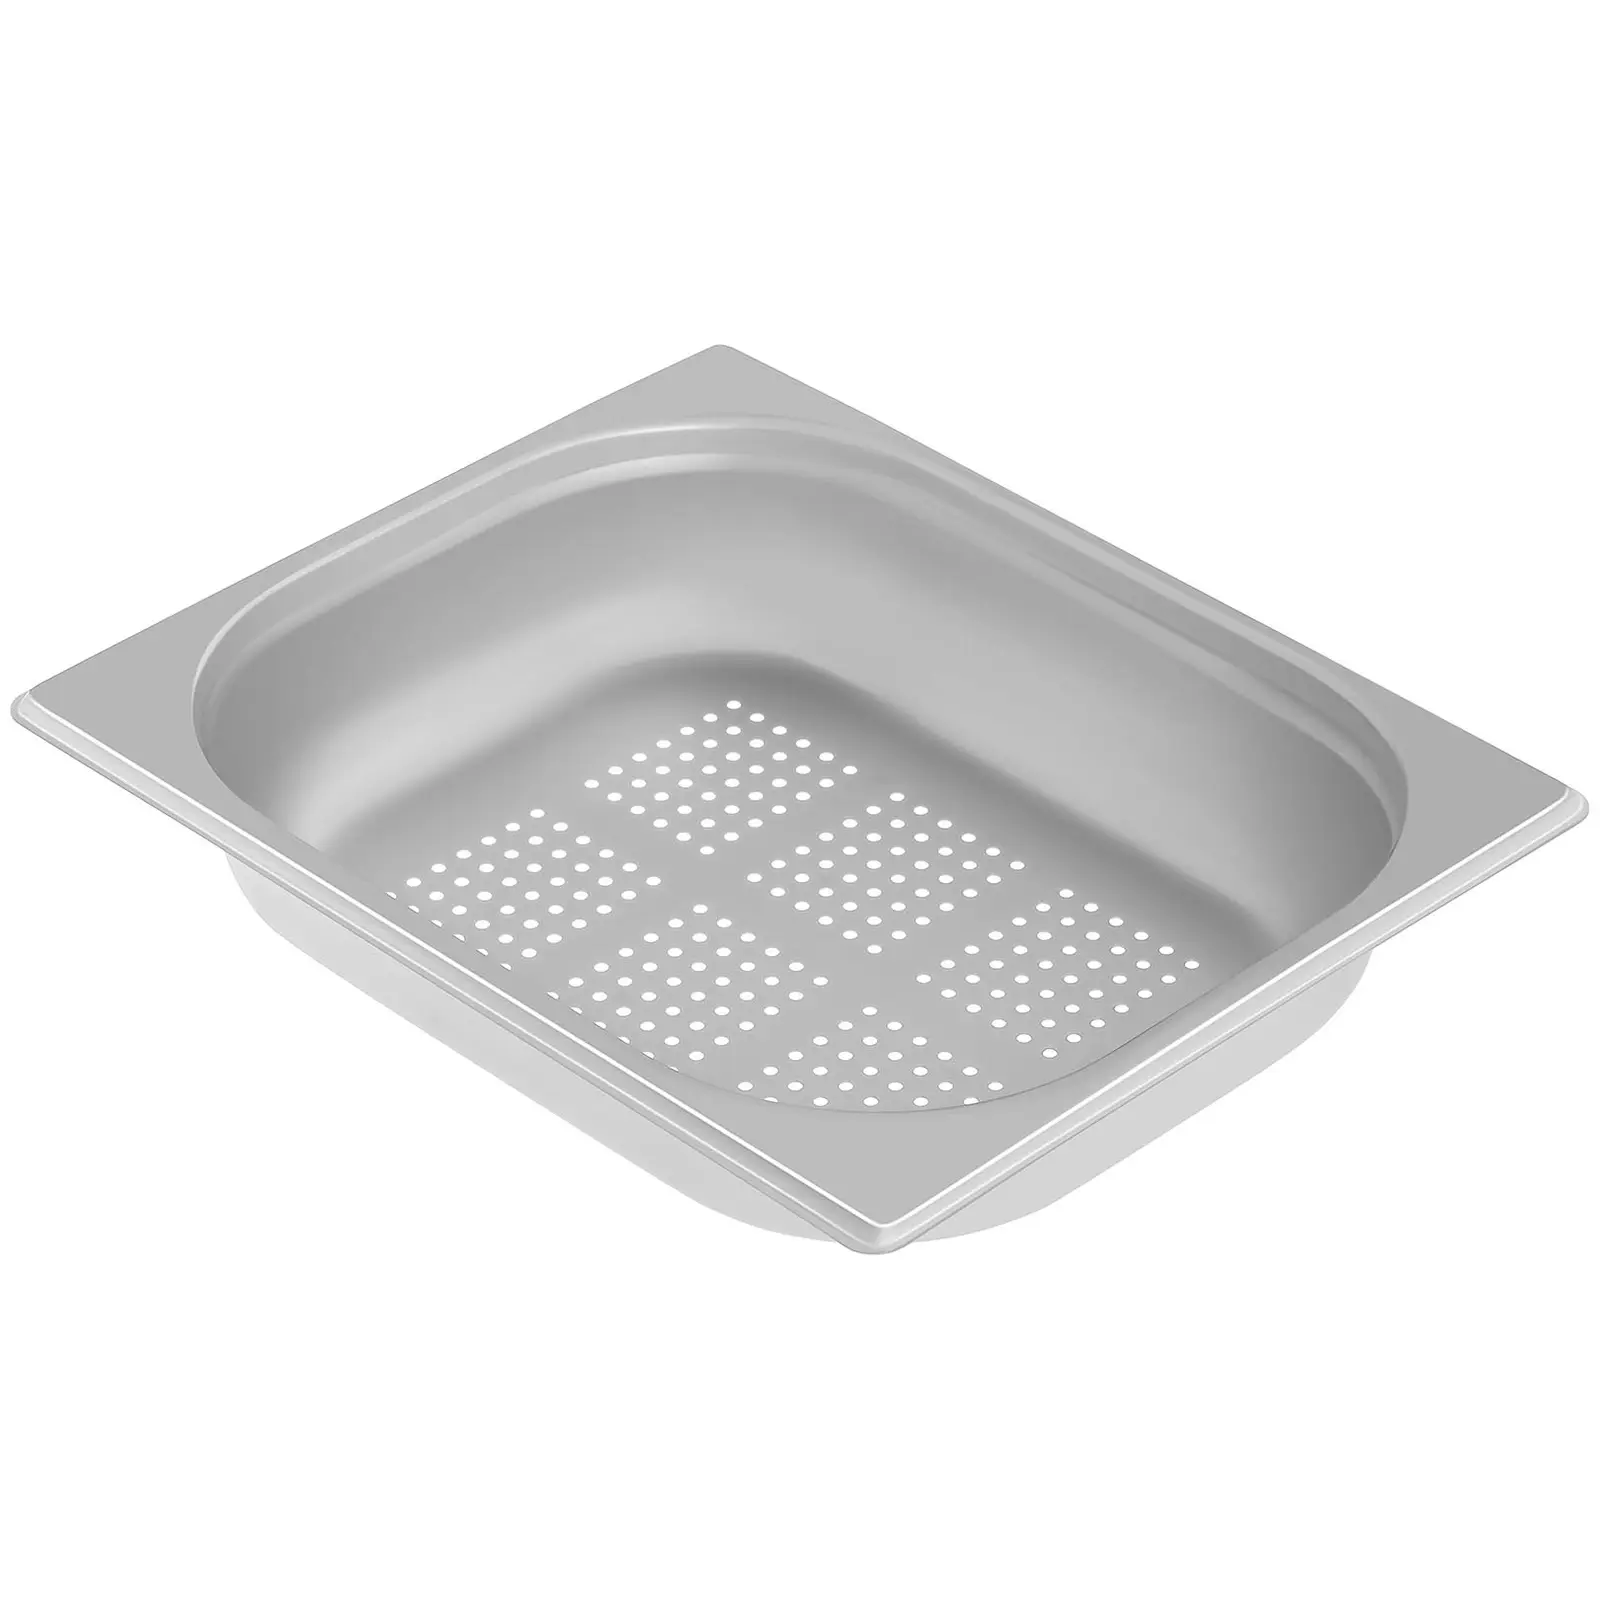 Gastronorm Tray - 1/2 - 65 mm - Perforated